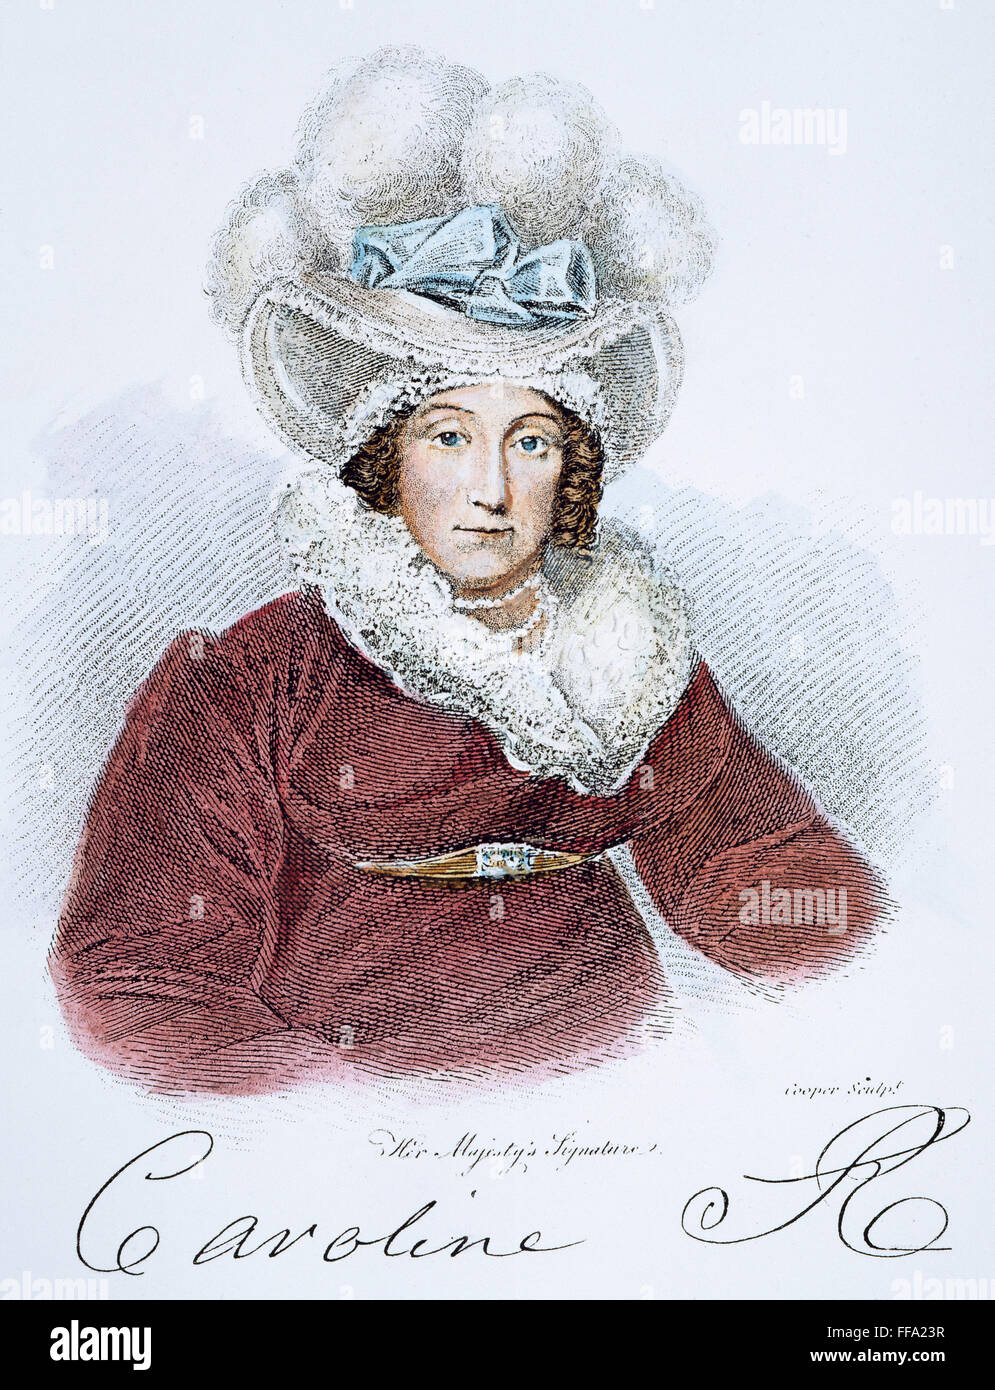 CAROLINE OF BRUNSWICK /n(1781-1821). Queen of Great Britain and Ireland, wife of George IV. Line and stipple engraving, English, 1820, after a painting by A. Wivell. Stock Photo